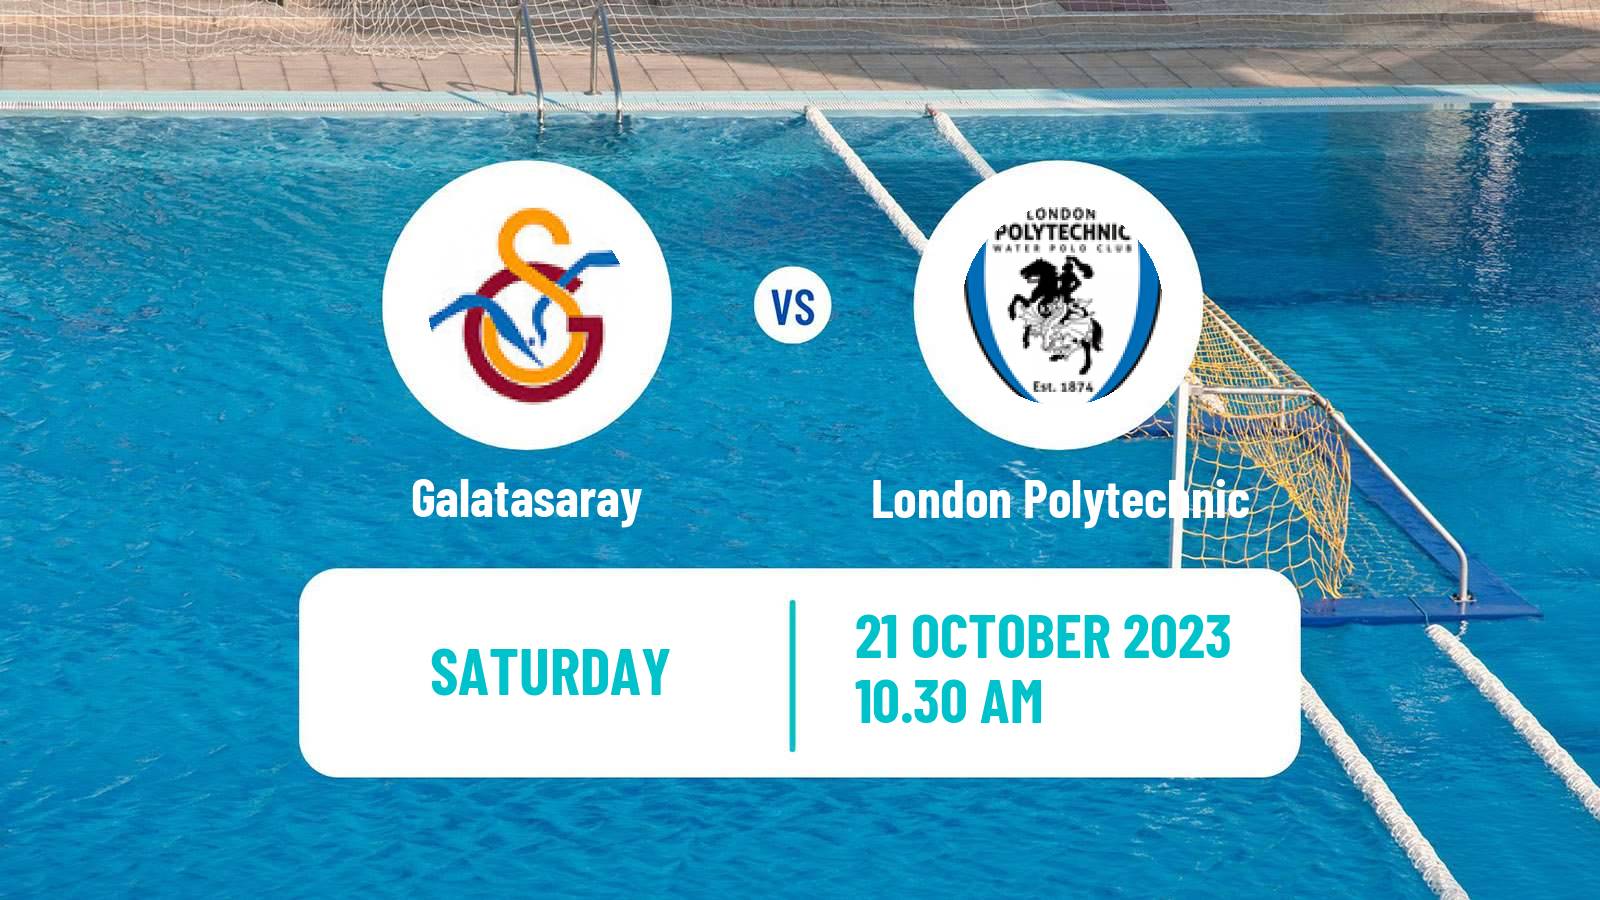 Water polo Challenger Cup Water Polo Galatasaray - London Polytechnic